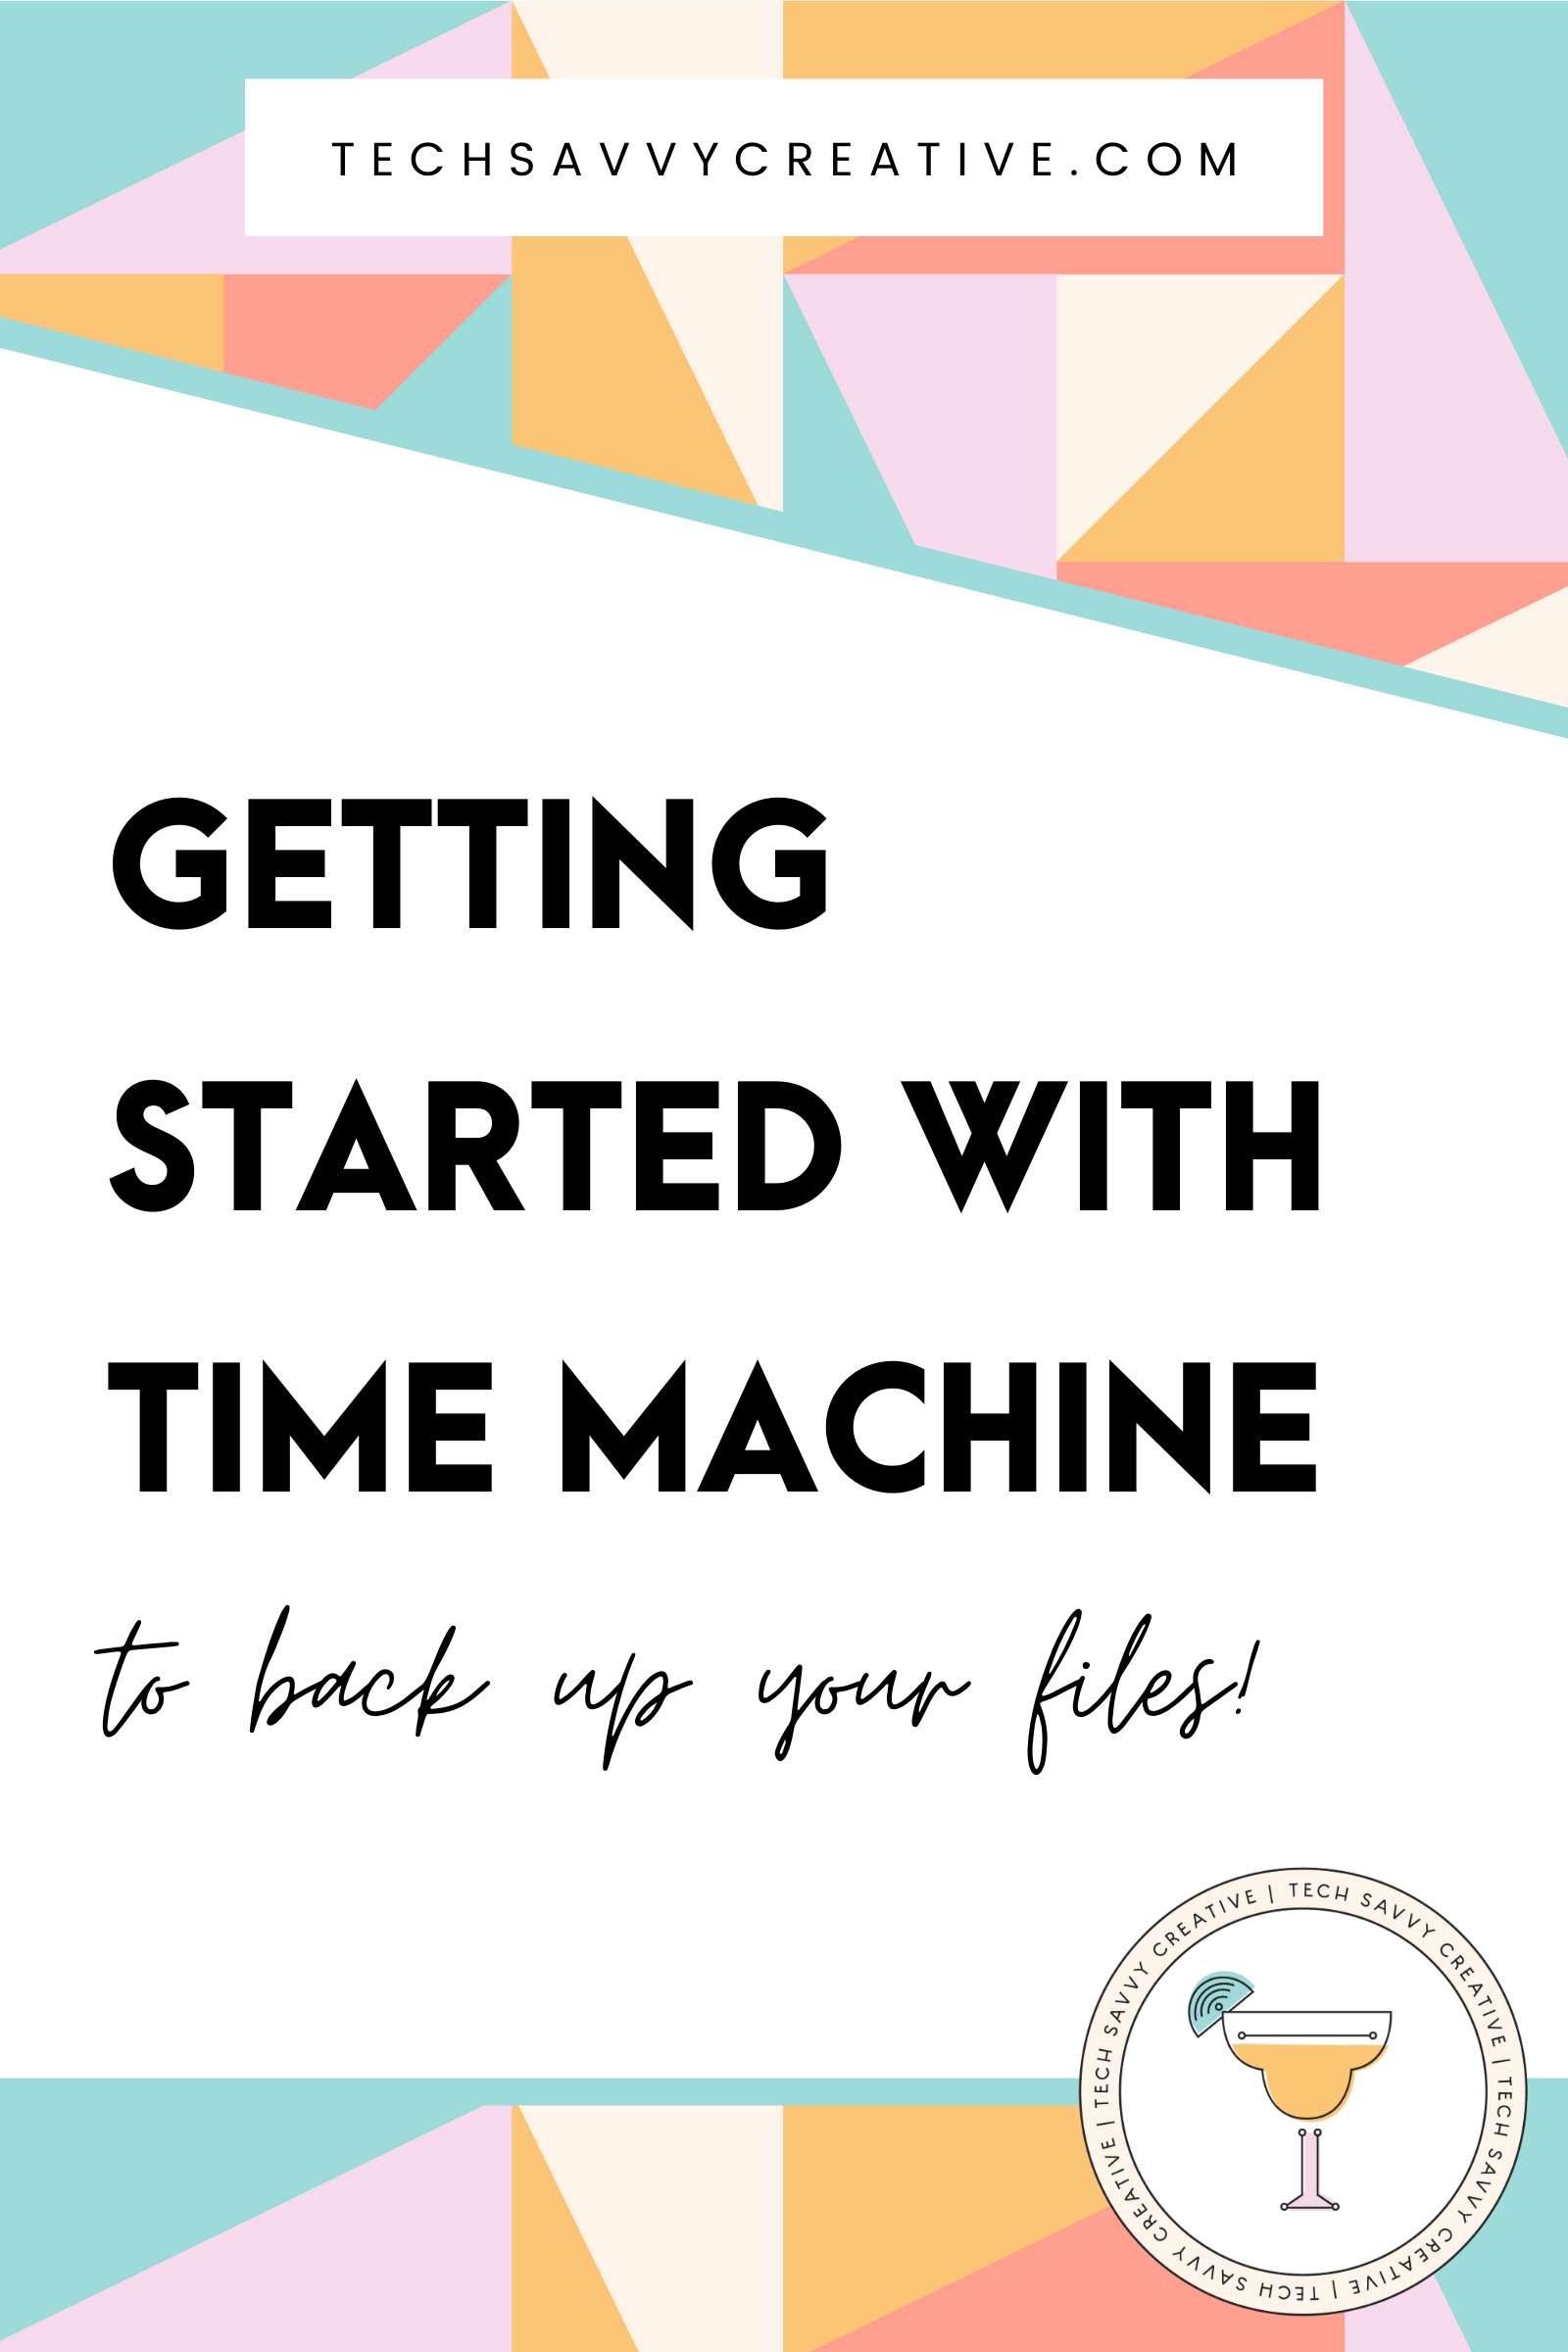 Learn How to Back Up Your Files with Apple Time Machine with the help of Tech Savvy Creative